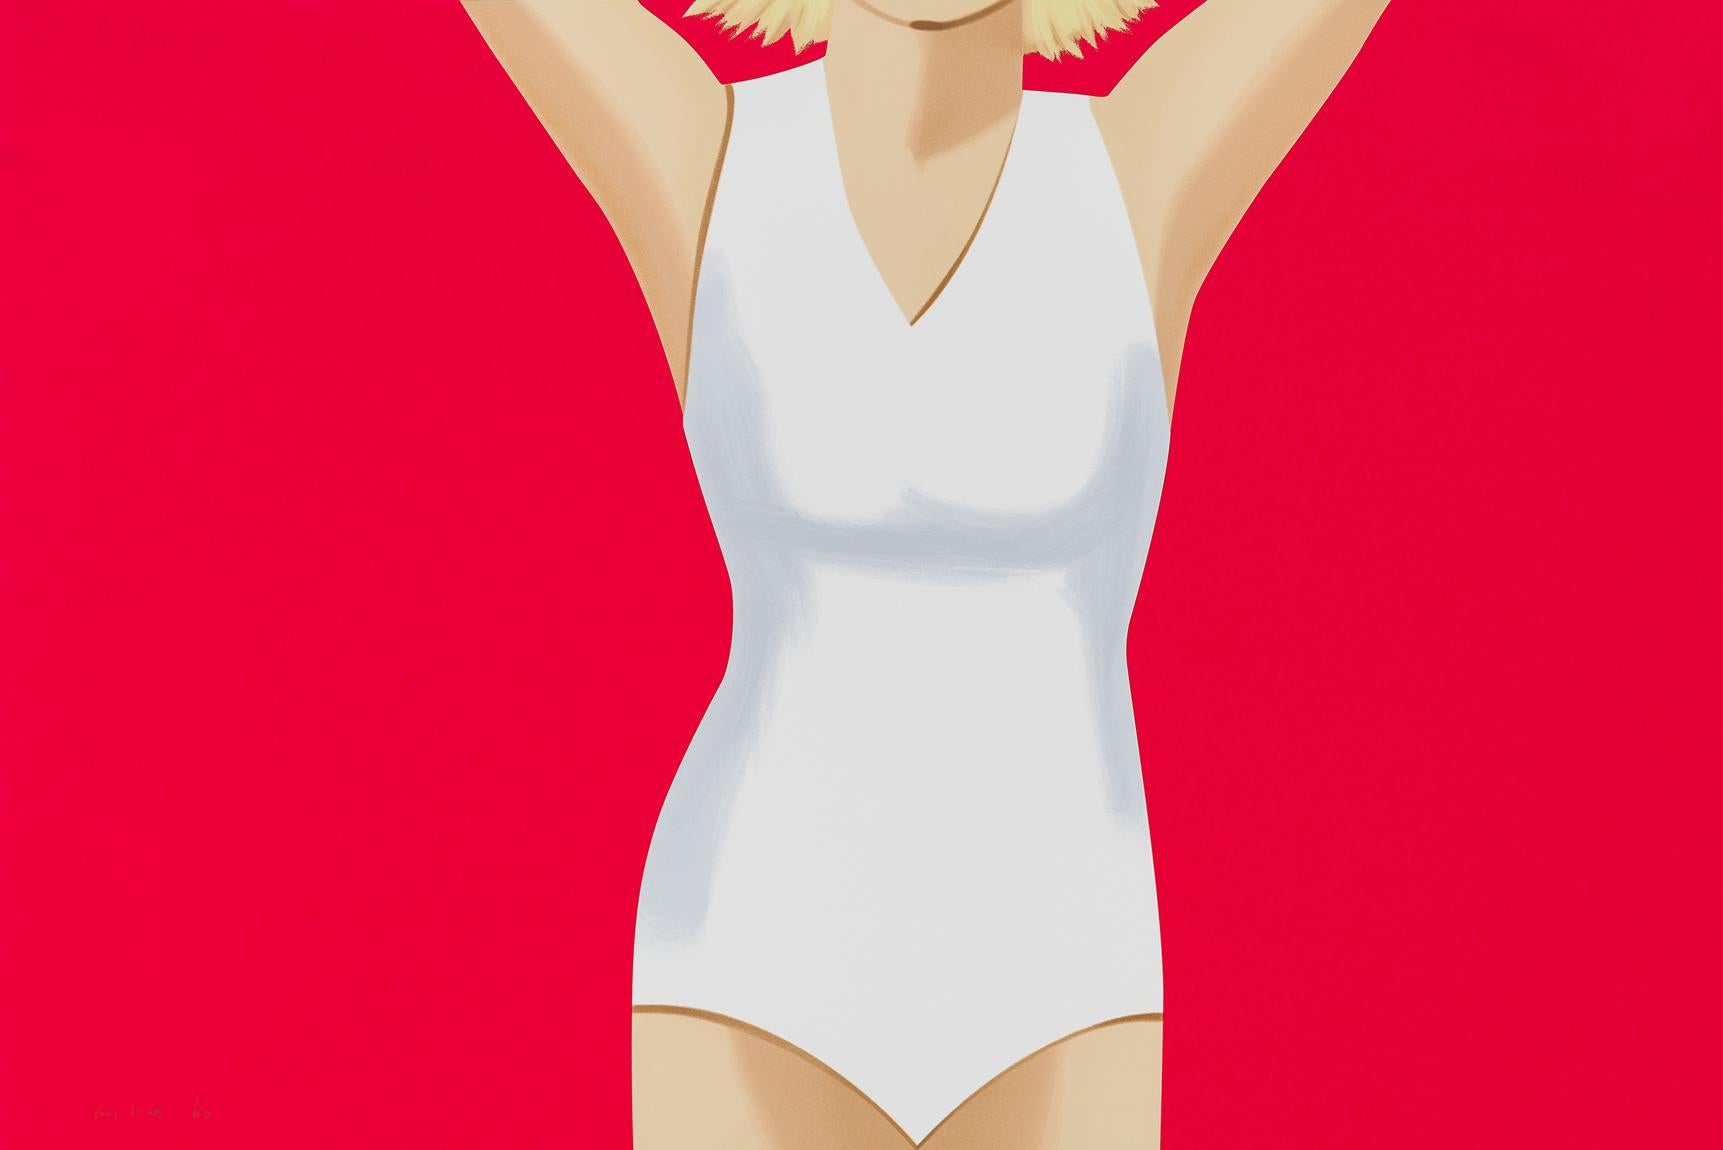 "Coca-Cola Girl 2" is one out of Alex Katz's Coca-Cola Girl series. These figures bare witness of his deep engagement with the ideas of advertisment, figurative art and how to come to a high form of abstraction in form as well as in colour. Edition